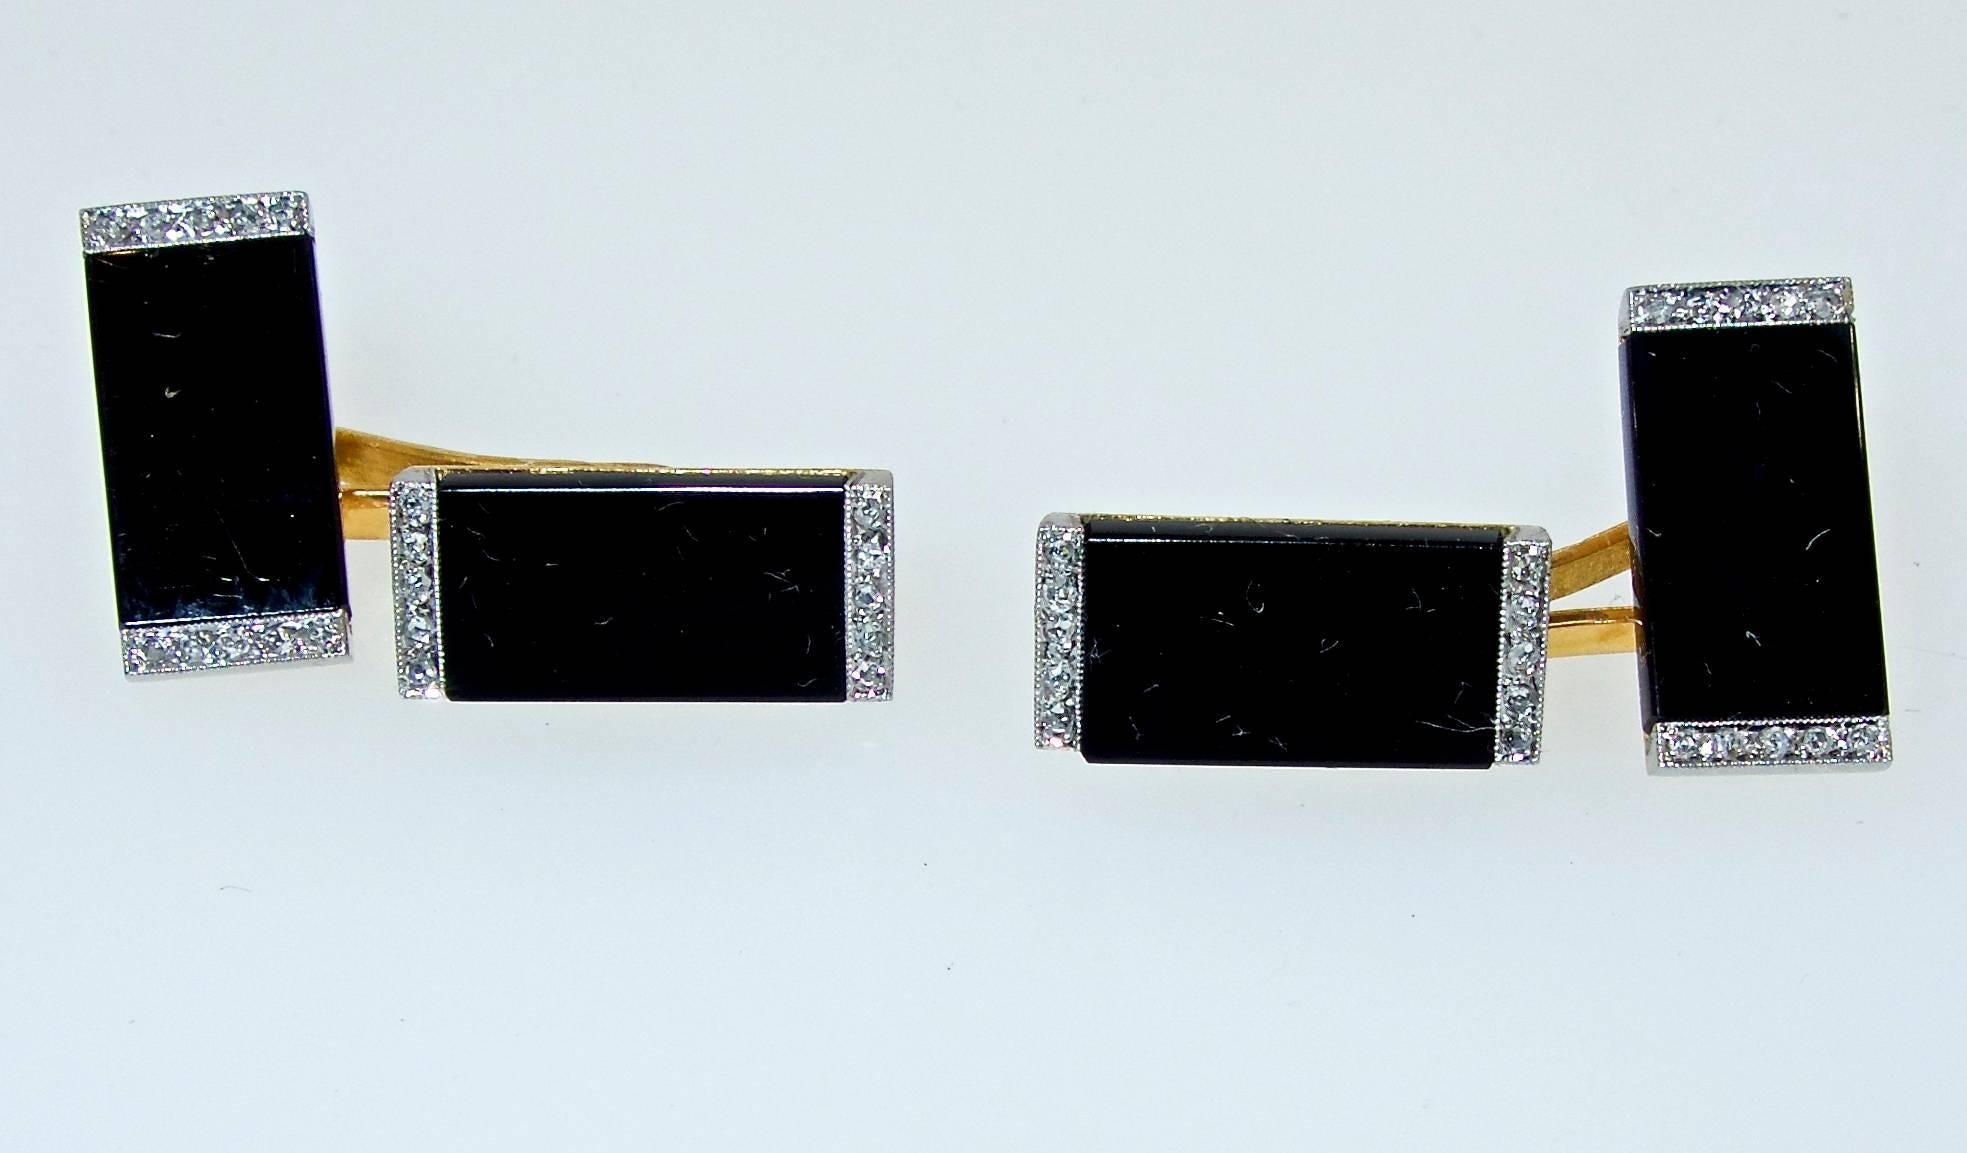 Ghiso, the famous French house made these back to back 18K cufflinks, circa 1925.  Onyx panels are bordered with 30 rose cut diamonds set in platinum.  Well made, (this type of linked center is a favorite as they are easy to put on!), geometric with